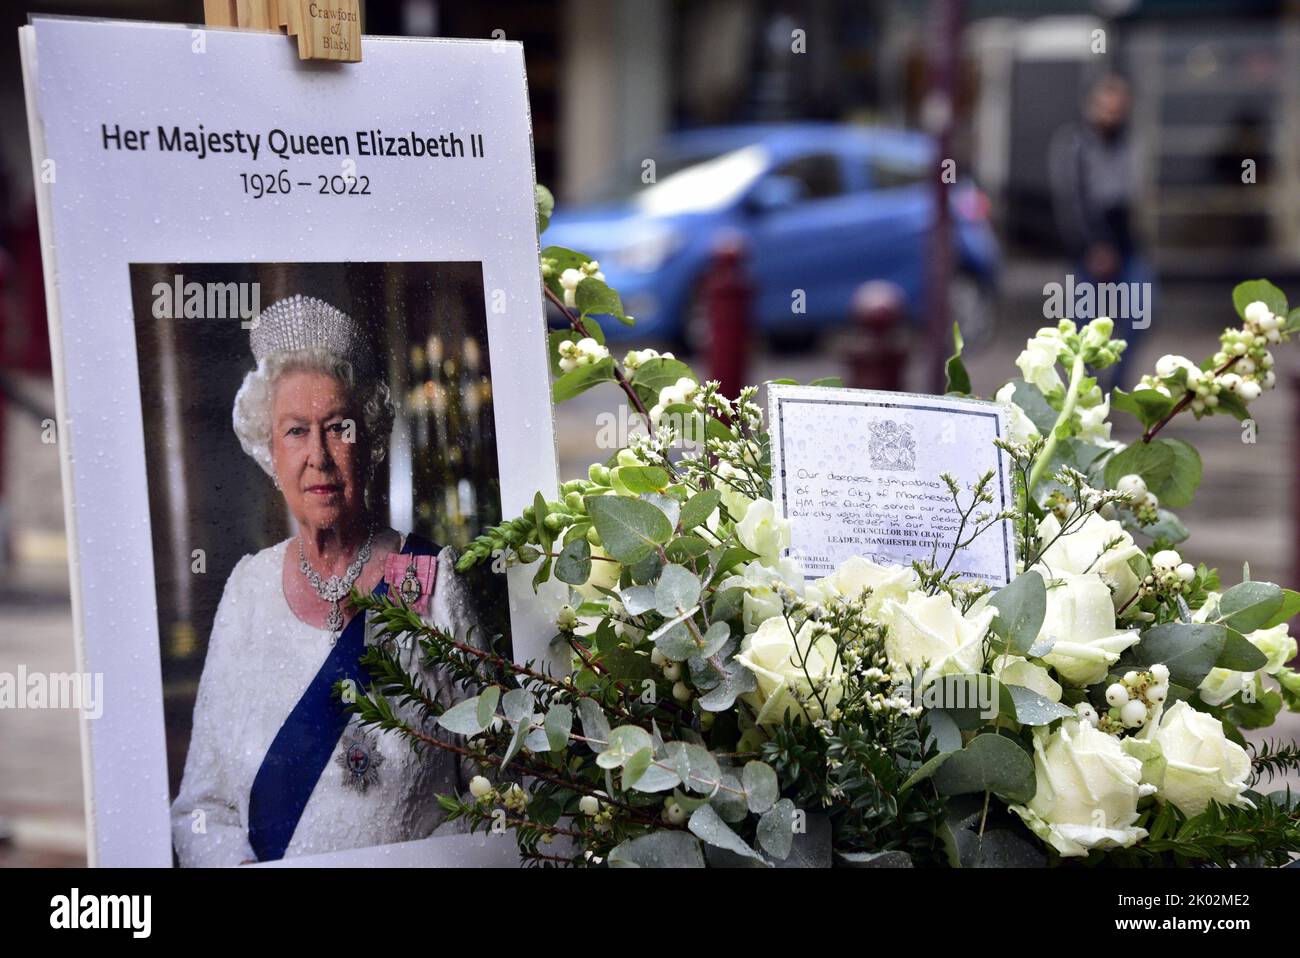 Manchester, UK, 9th September, 2022. Flowers left in St Ann's Square, Manchester, UK. Mourning period begins after the death of Her Majesty, Queen Elizabeth II, in Manchester, United Kingdom. Her Majesty, The Queen, died, aged 96, on 8th September, 2022. Manchester City Council has said on its website that the city of Manchester will be observing the official 10-day mourning period and that: 'Residents may wish to lay flowers to mark Her Majesty’s death. You can lay flowers at St Ann's Square'. Credit: Terry Waller/Alamy Live News Stock Photo